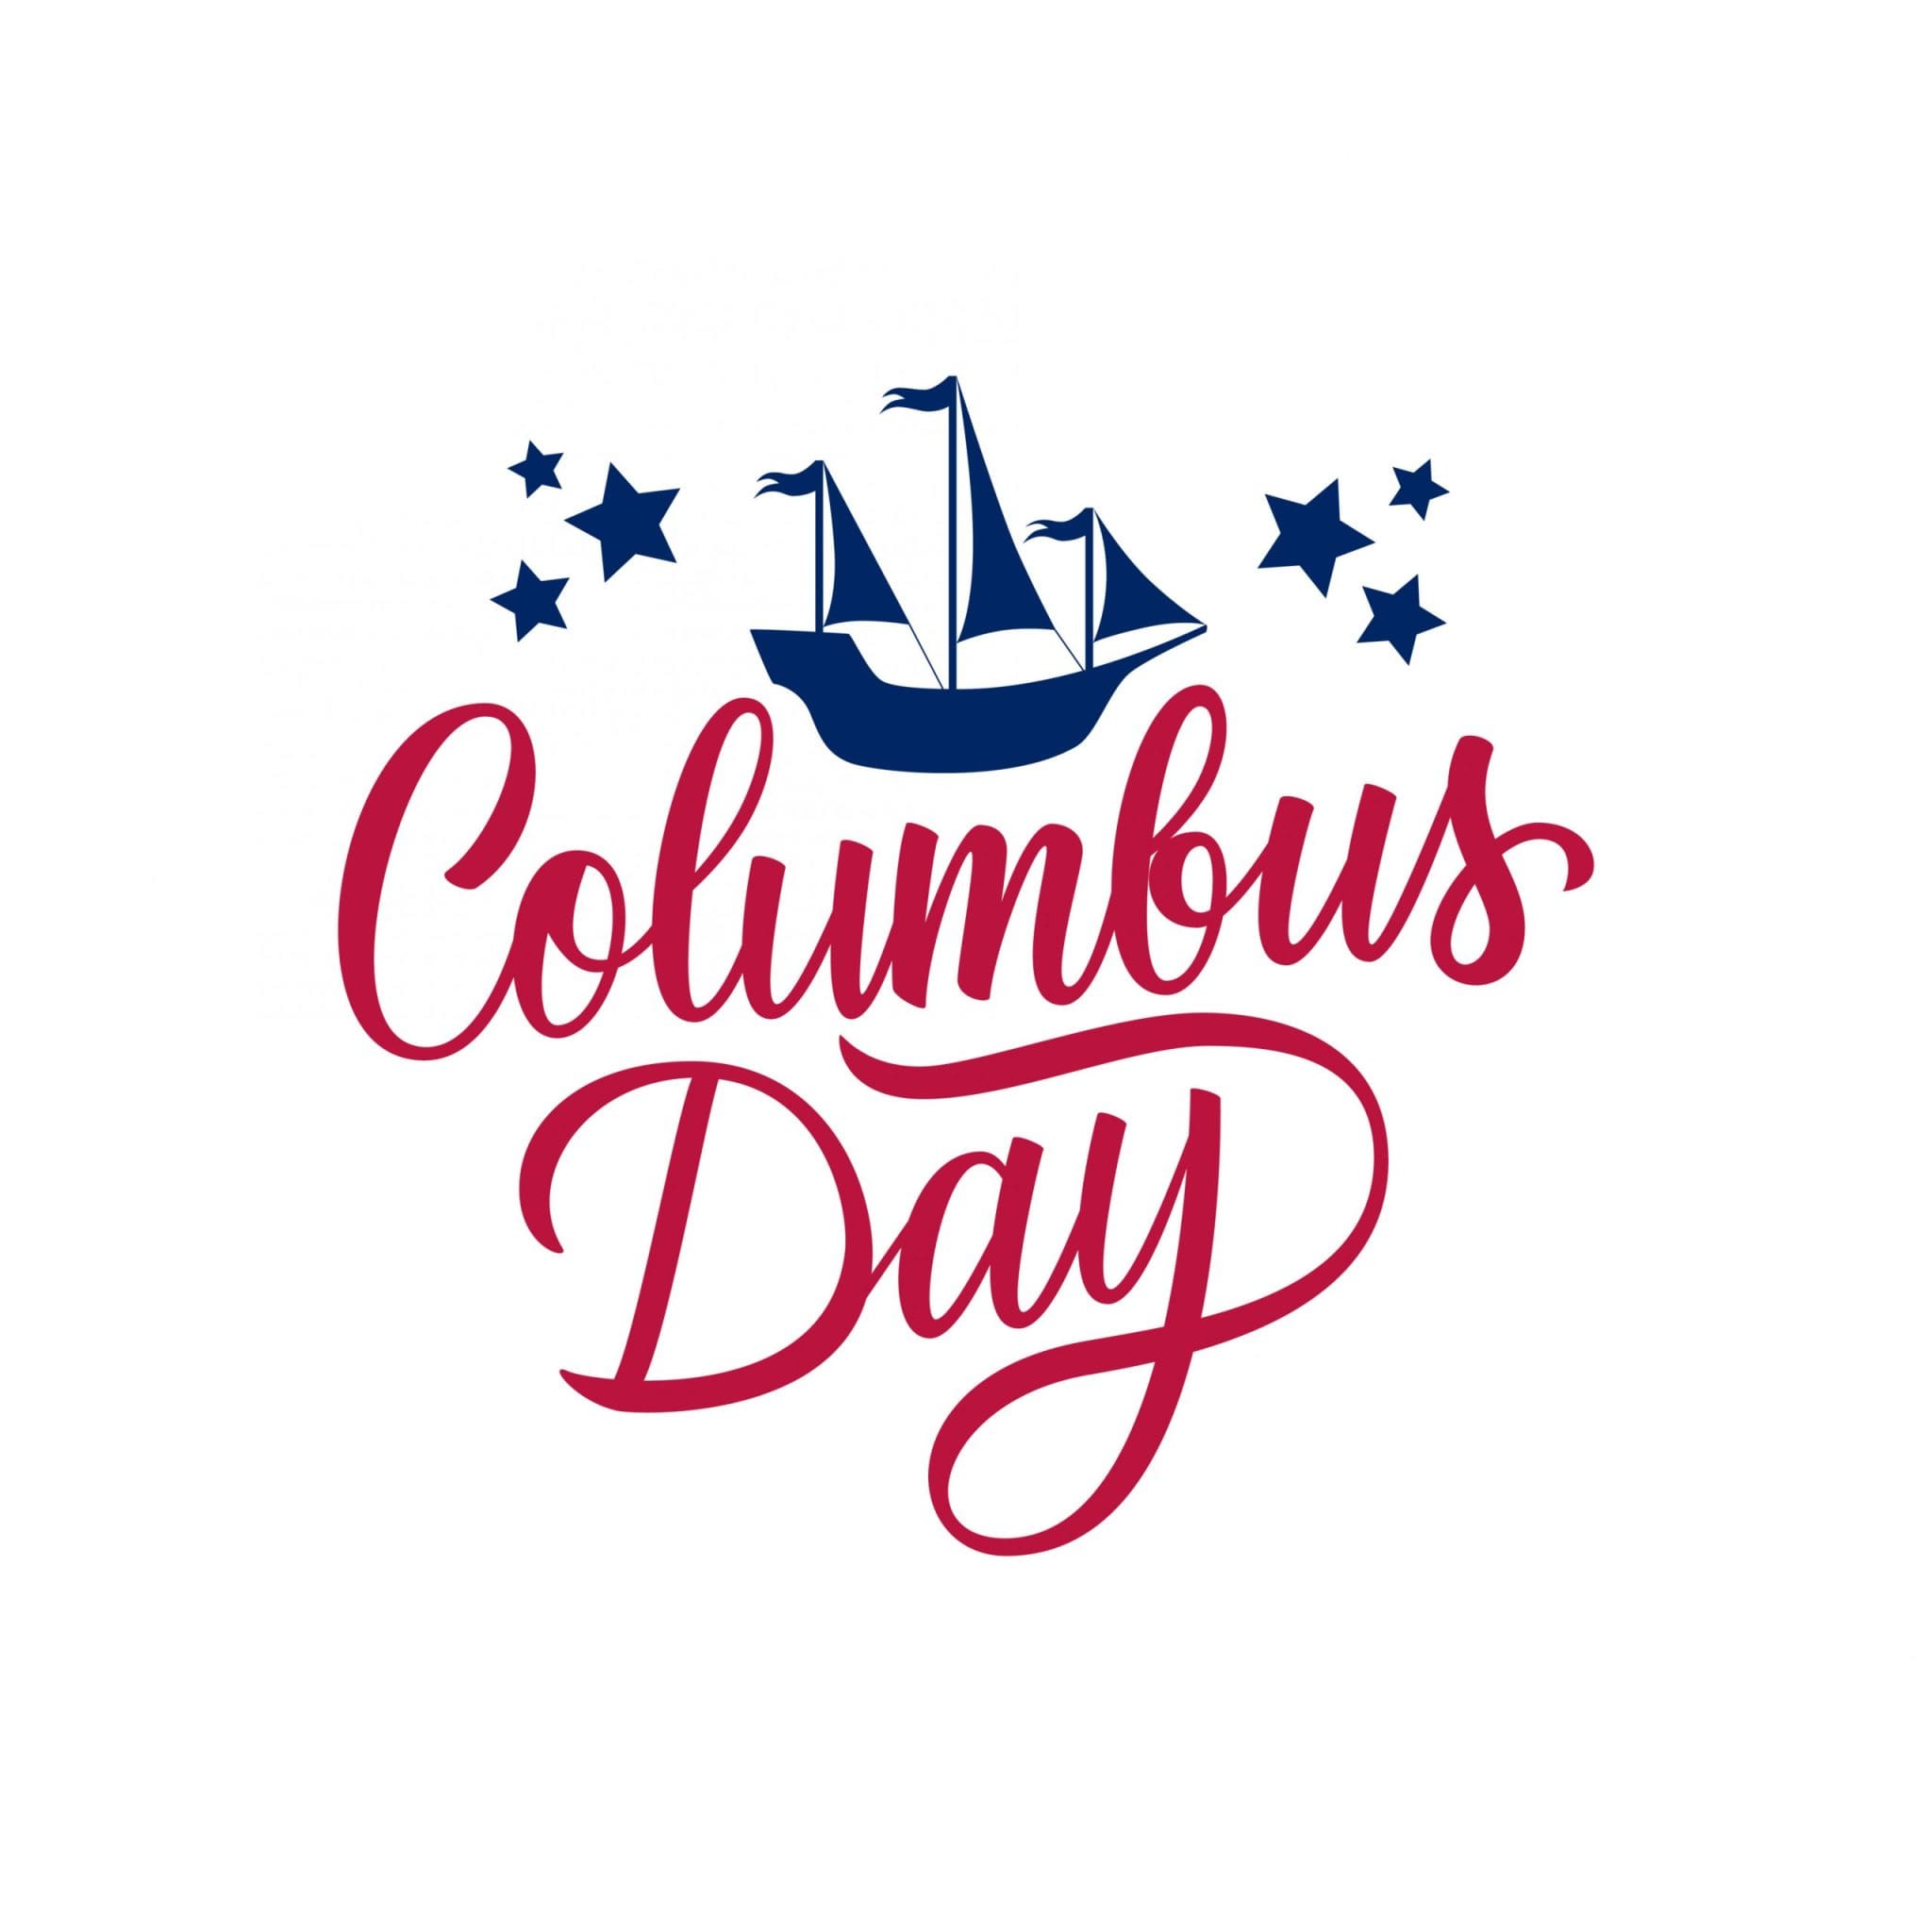 Day columbus The truth